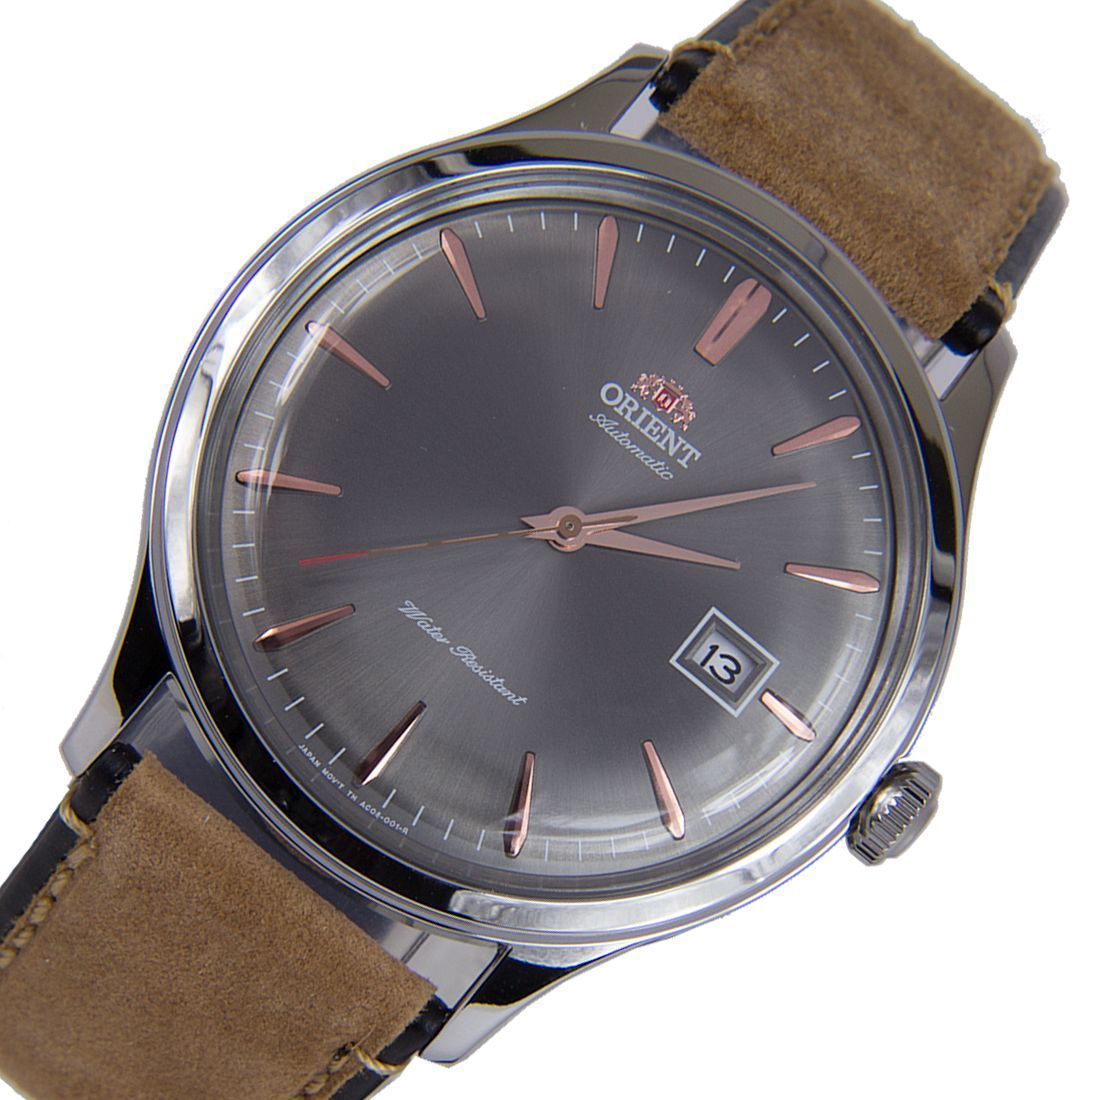 Orient Bambino Grey Dial AC08003A FAC08003A0 Leather Watch -Orient